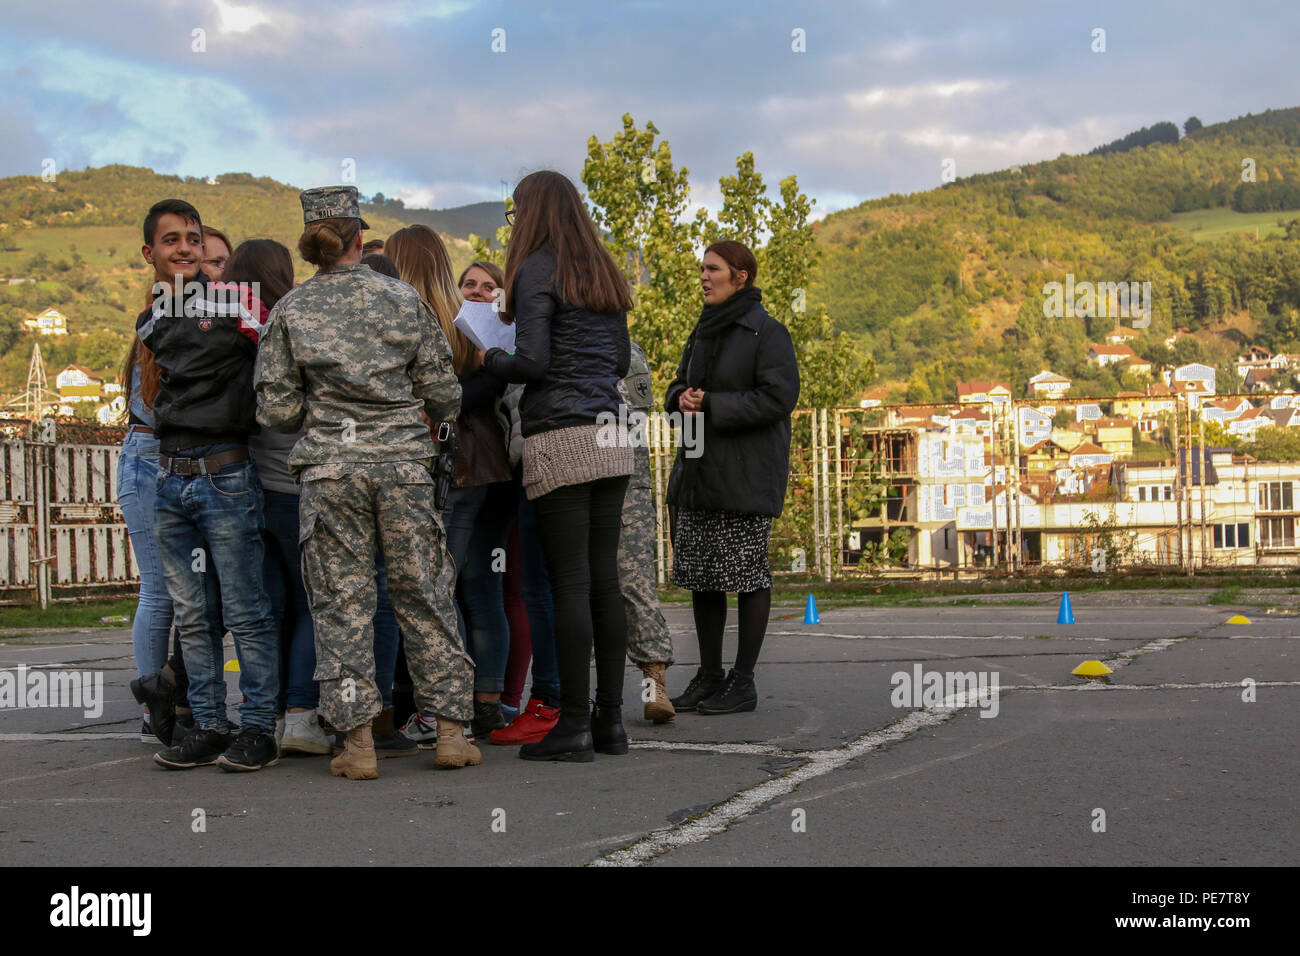 Sgt. Brittany Hall, a U.S. Army Reserve Soldier deployed to Kosovo with the 345th Combat Support Hospital, leads a group of students attending a Violence Free Future youth tolerance event through a game called The Human Knot, Oct. 17, 2015, in Kacanik, Kosovo. During the game, participants used teamwork and communication skills to untangle themselves without letting go of each other’s hands. Hall and several other members of Multinational Battle Group-East volunteered their free time to lead this and other games, used to simulate real-life situations and start conversations about promoting pro Stock Photo